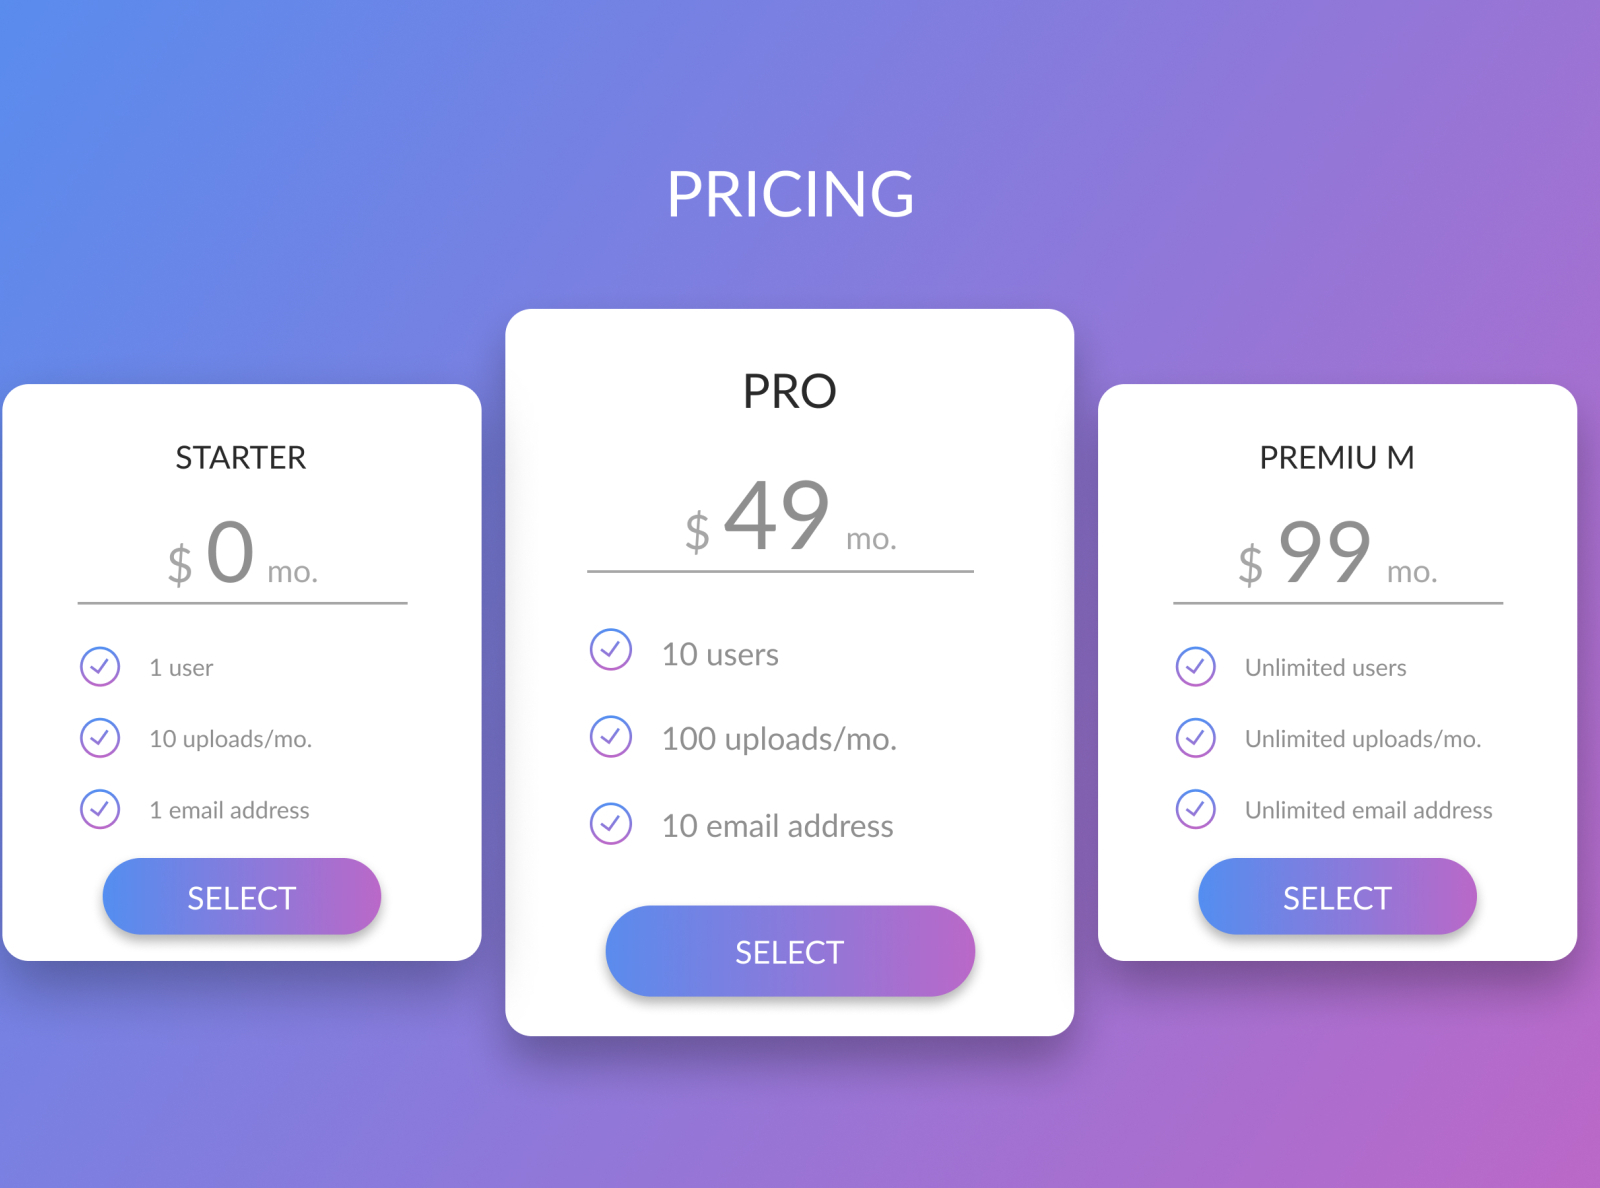 Pricing page design by Asogwa Maxwell C Alexander on Dribbble